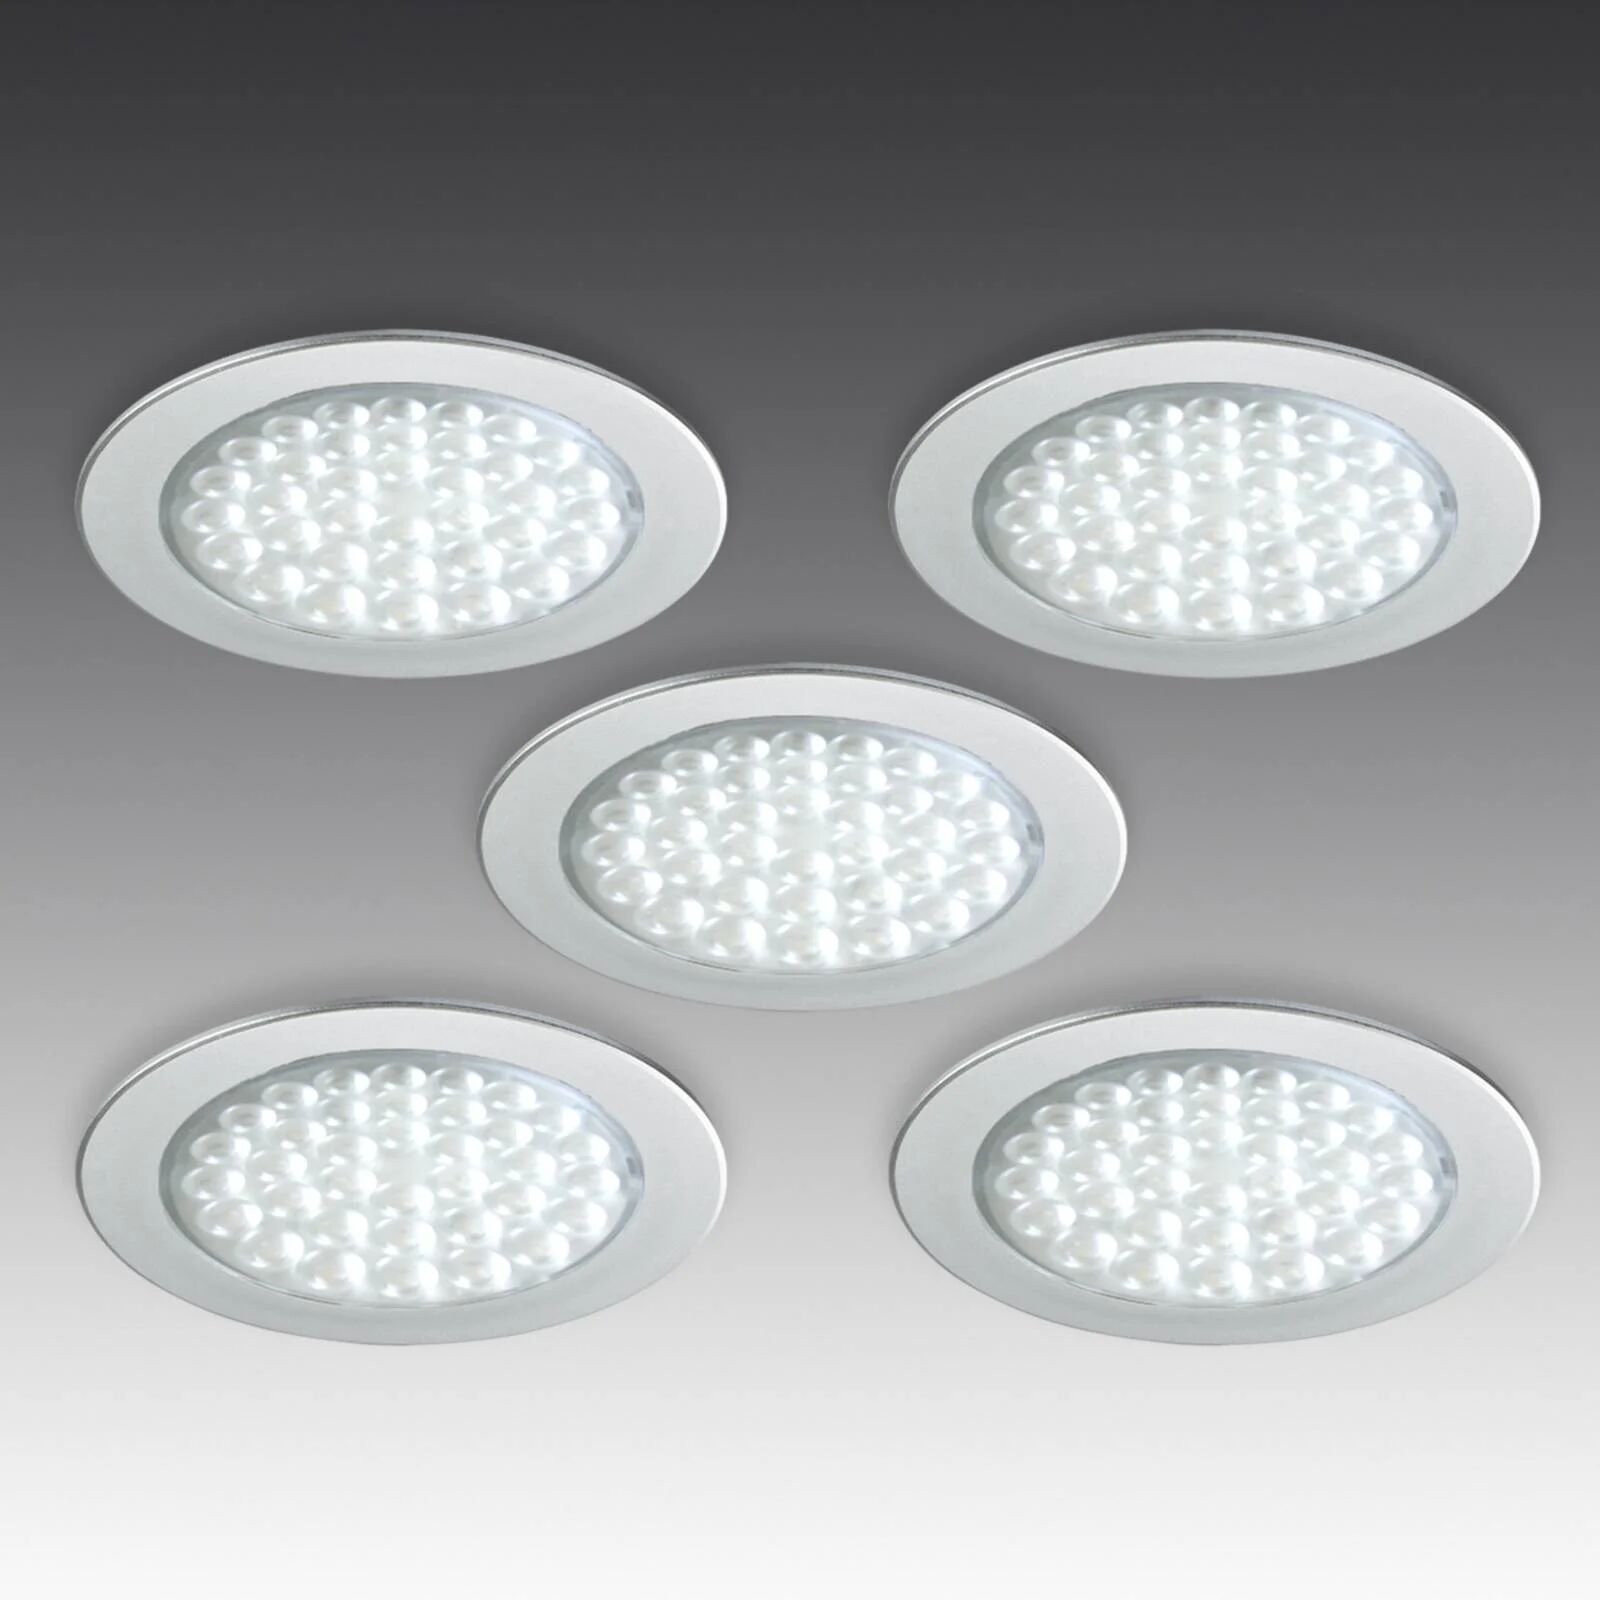 Hera Five R 68 LED recessed lights stainless steel look